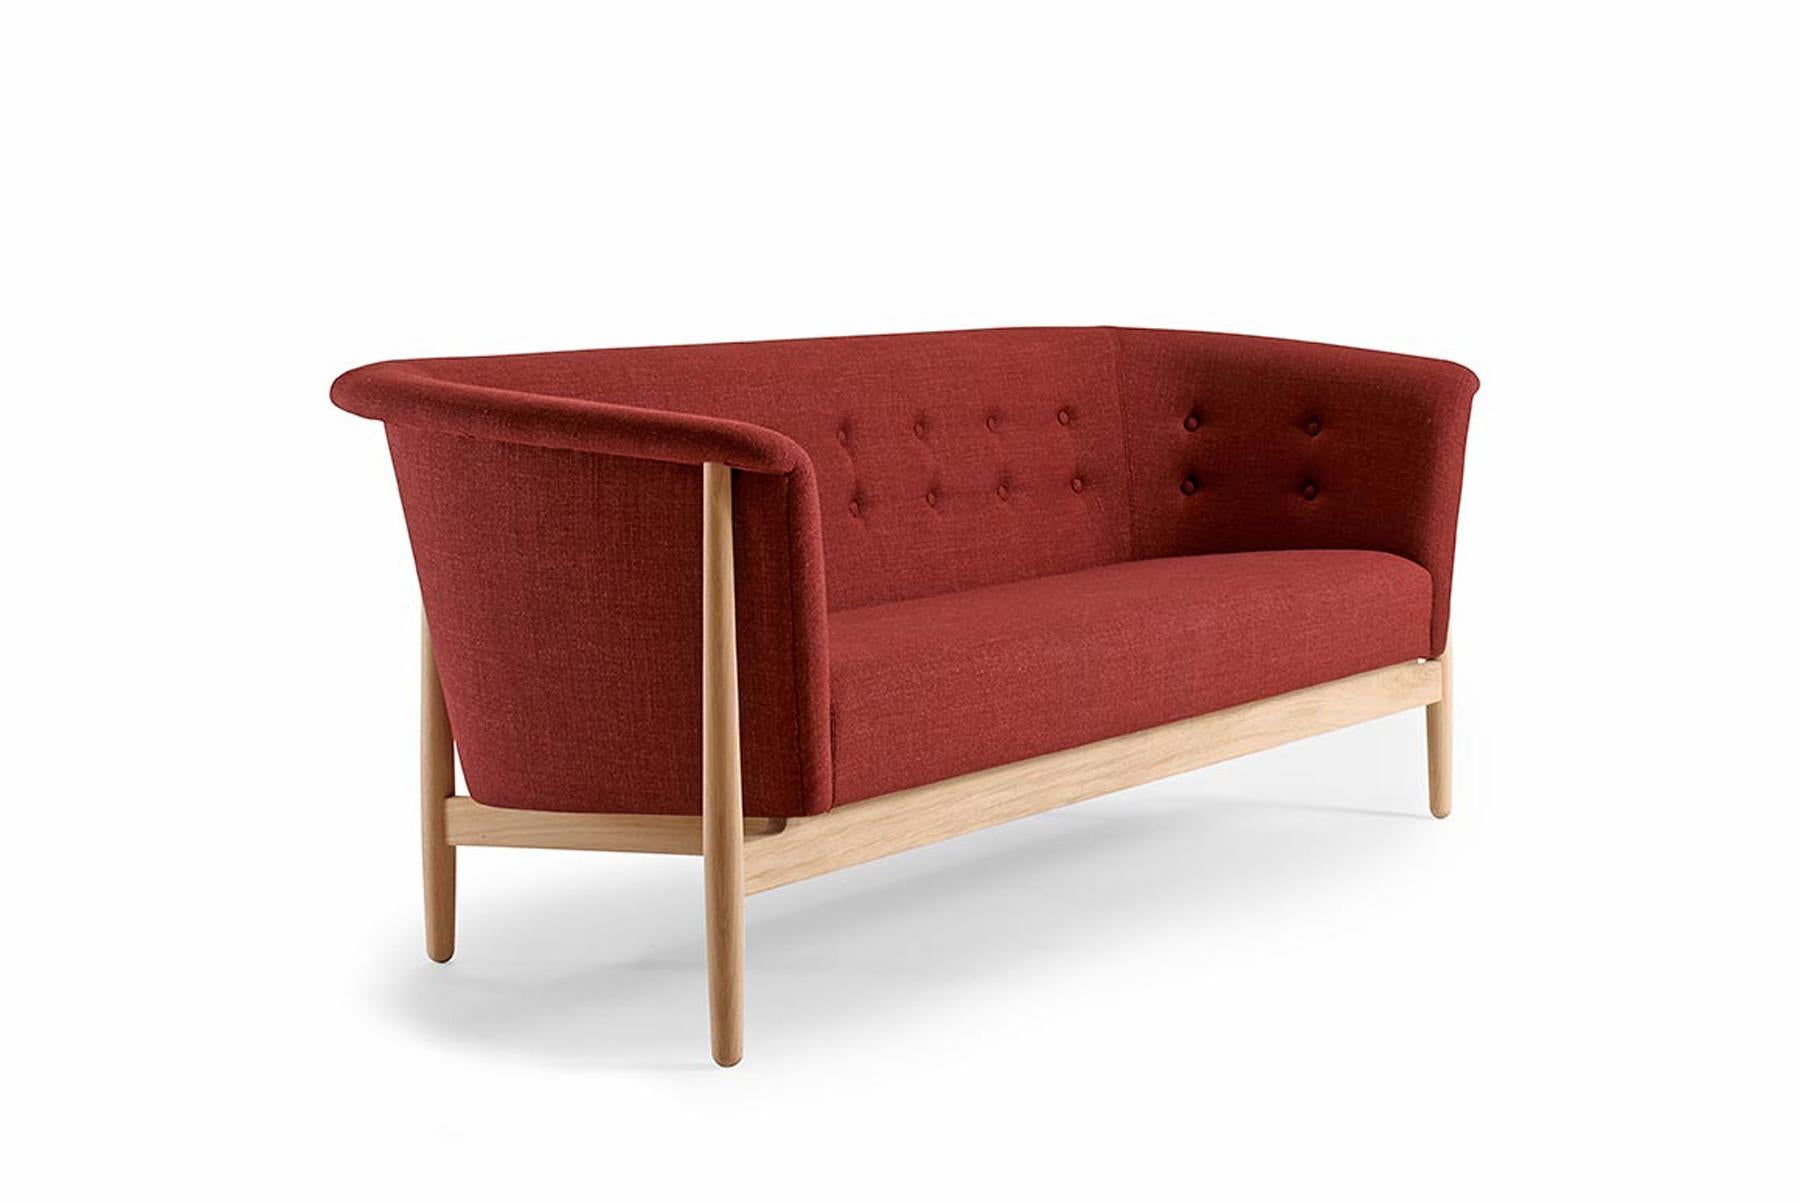 Designed by Nanna + Jørgen Ditzel in the 1950s, this stunning model is known as the Vita sofa. The silhouette pulls from traditional forms but is crafted in an open, organic design. Contrasting fabrics and button tufting adorn the upholstery